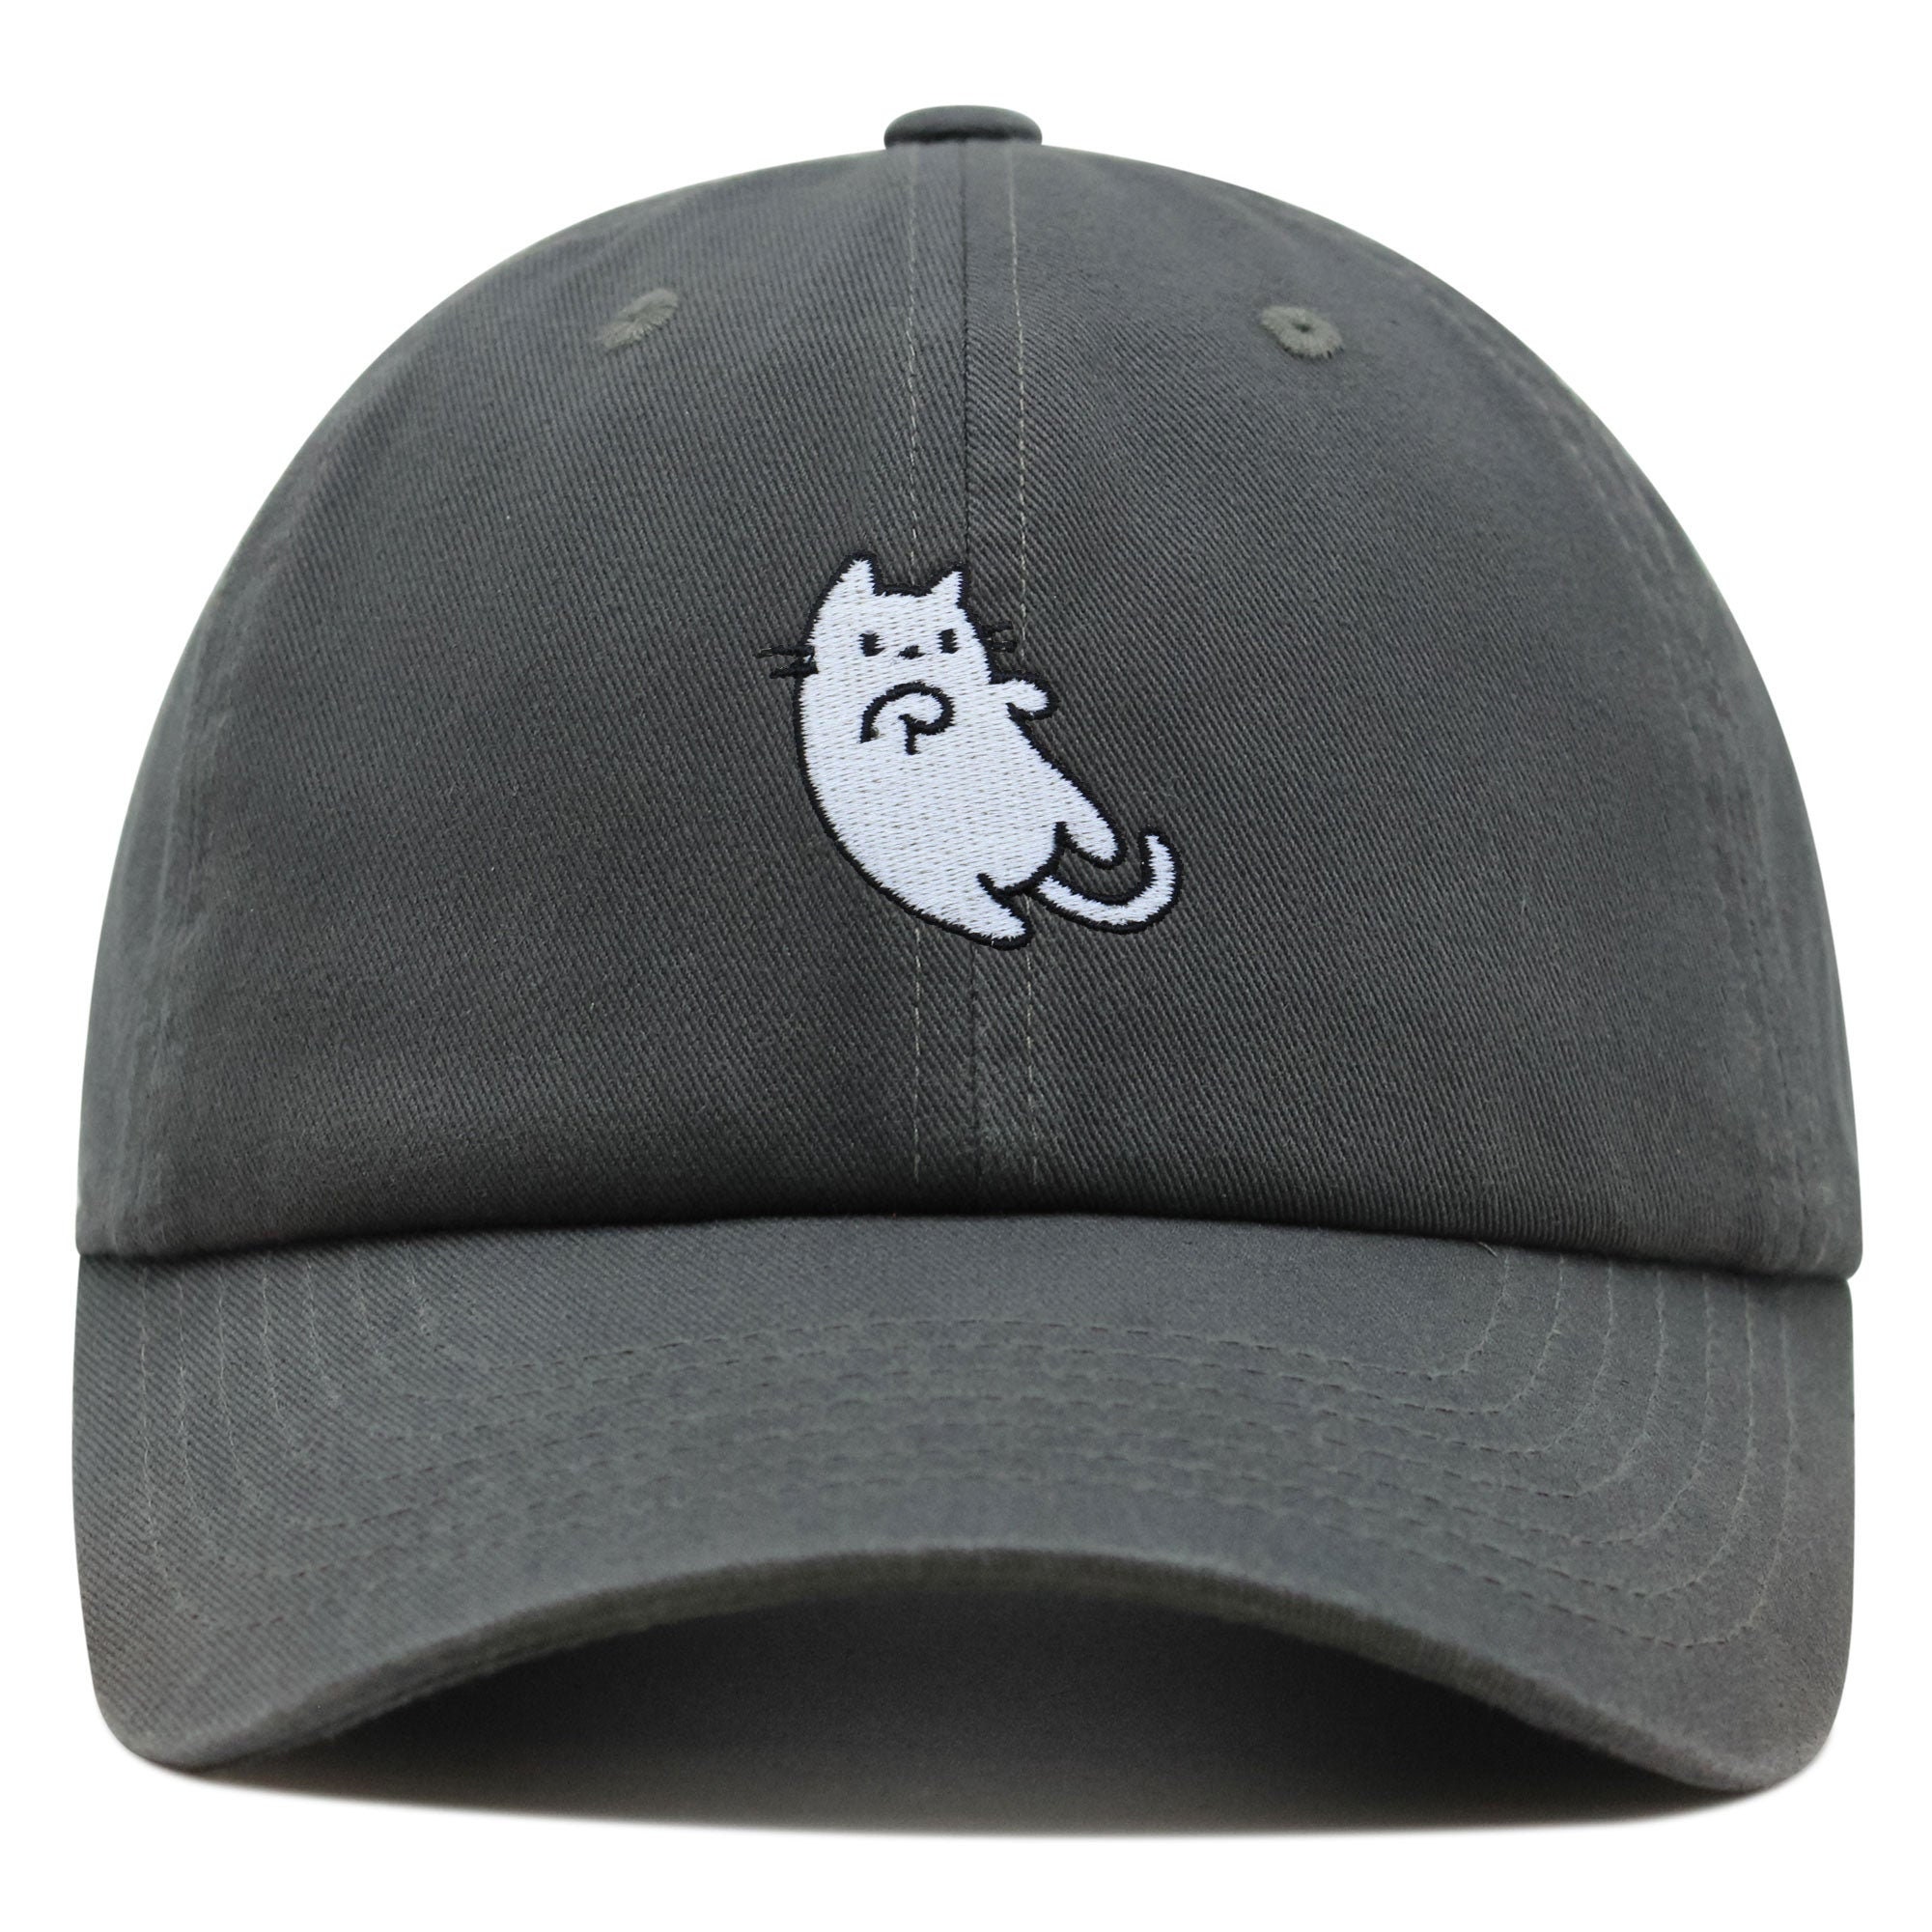 Cat Premium Dad Hat Embroidered Baseball Cap Laying Down